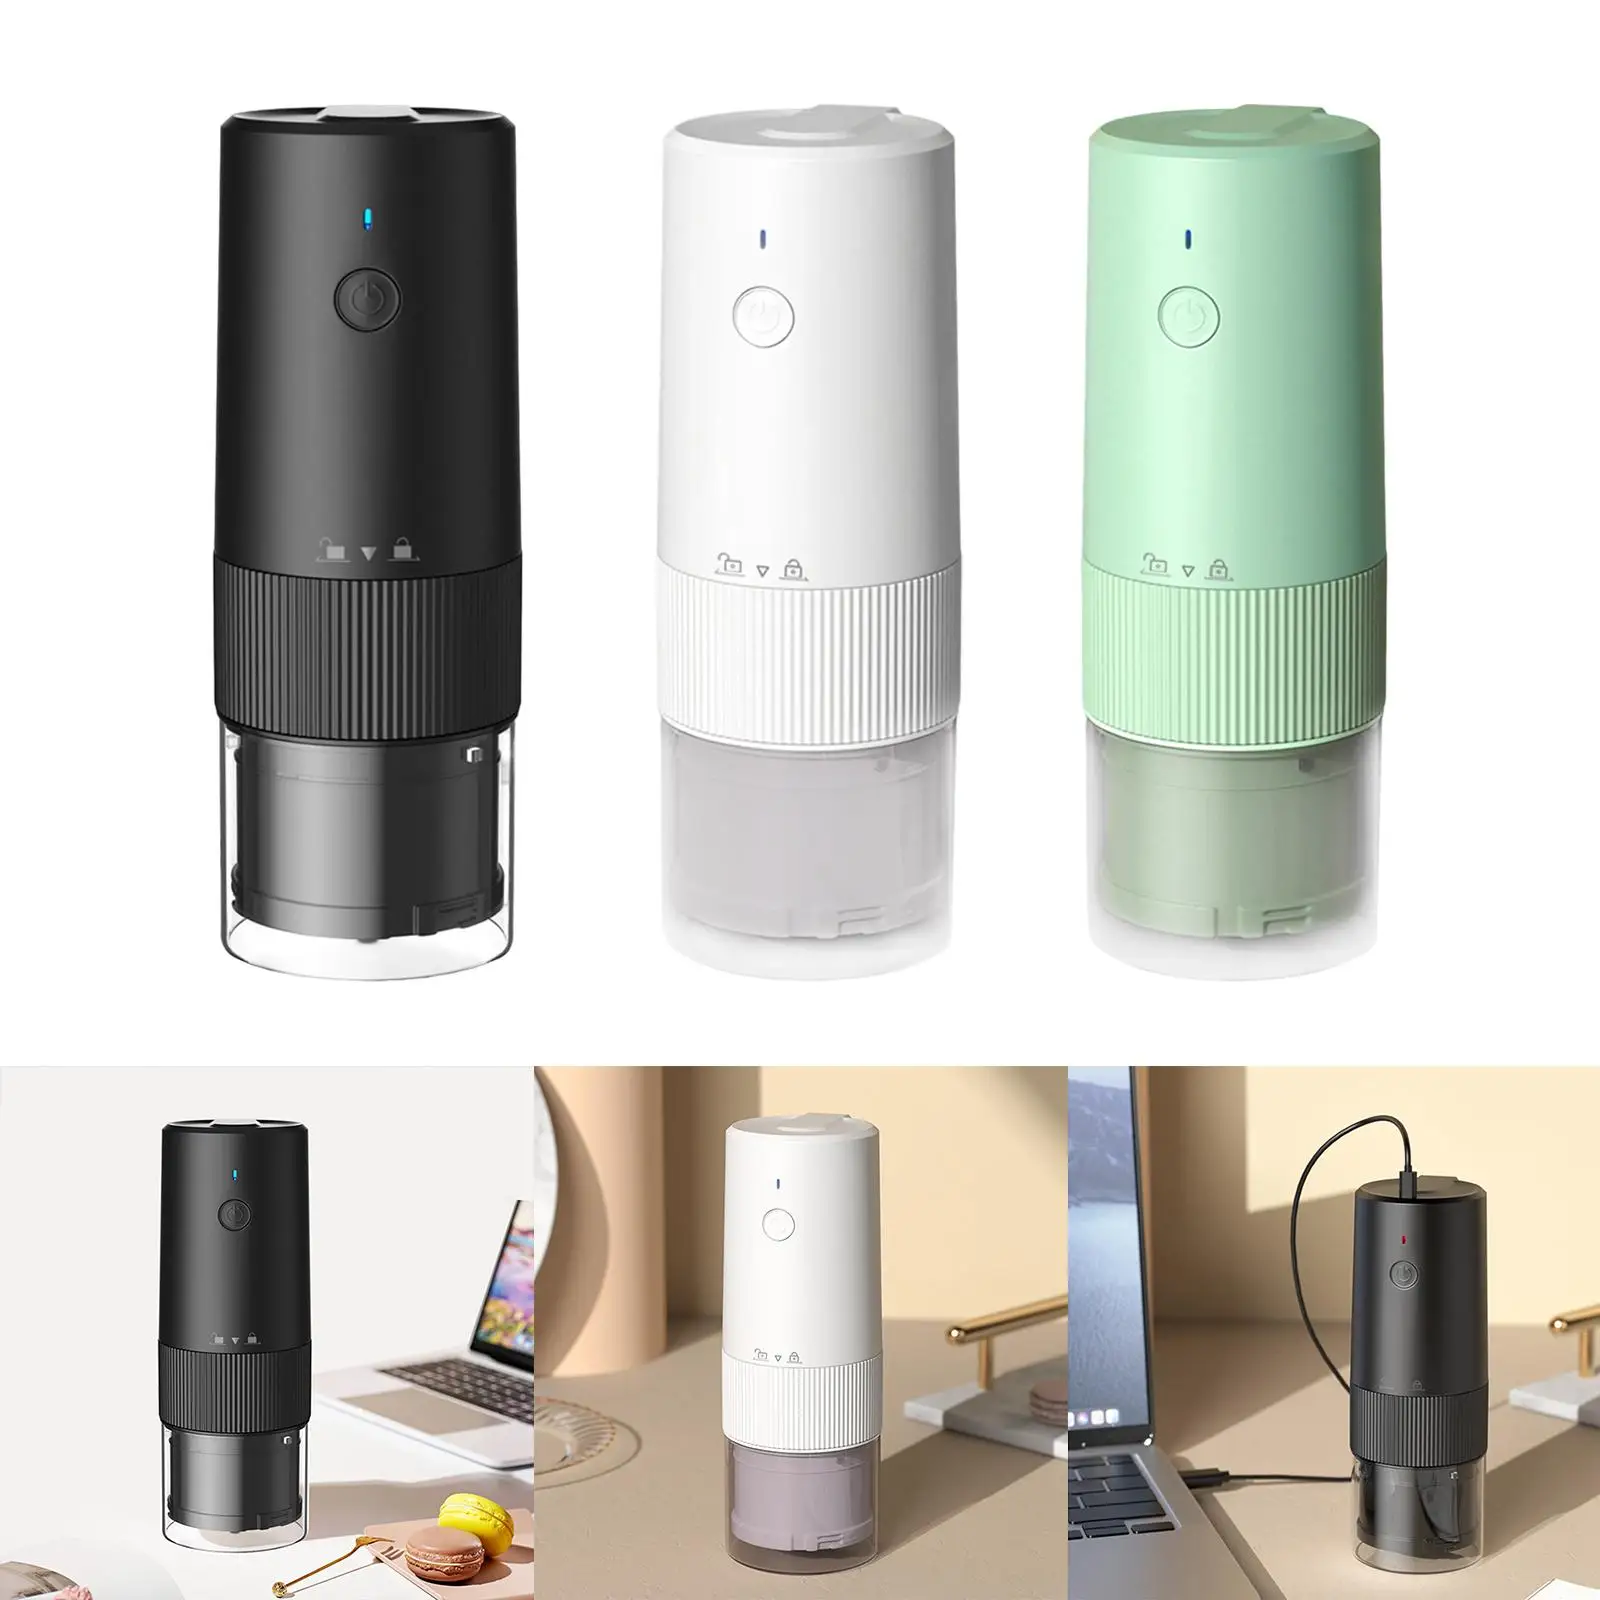 Portable Coffee Grinder Machine Coffee Mill Coffee Bean Grinder for Nuts Beans Spices Grains Grinding Kitchen Household Office